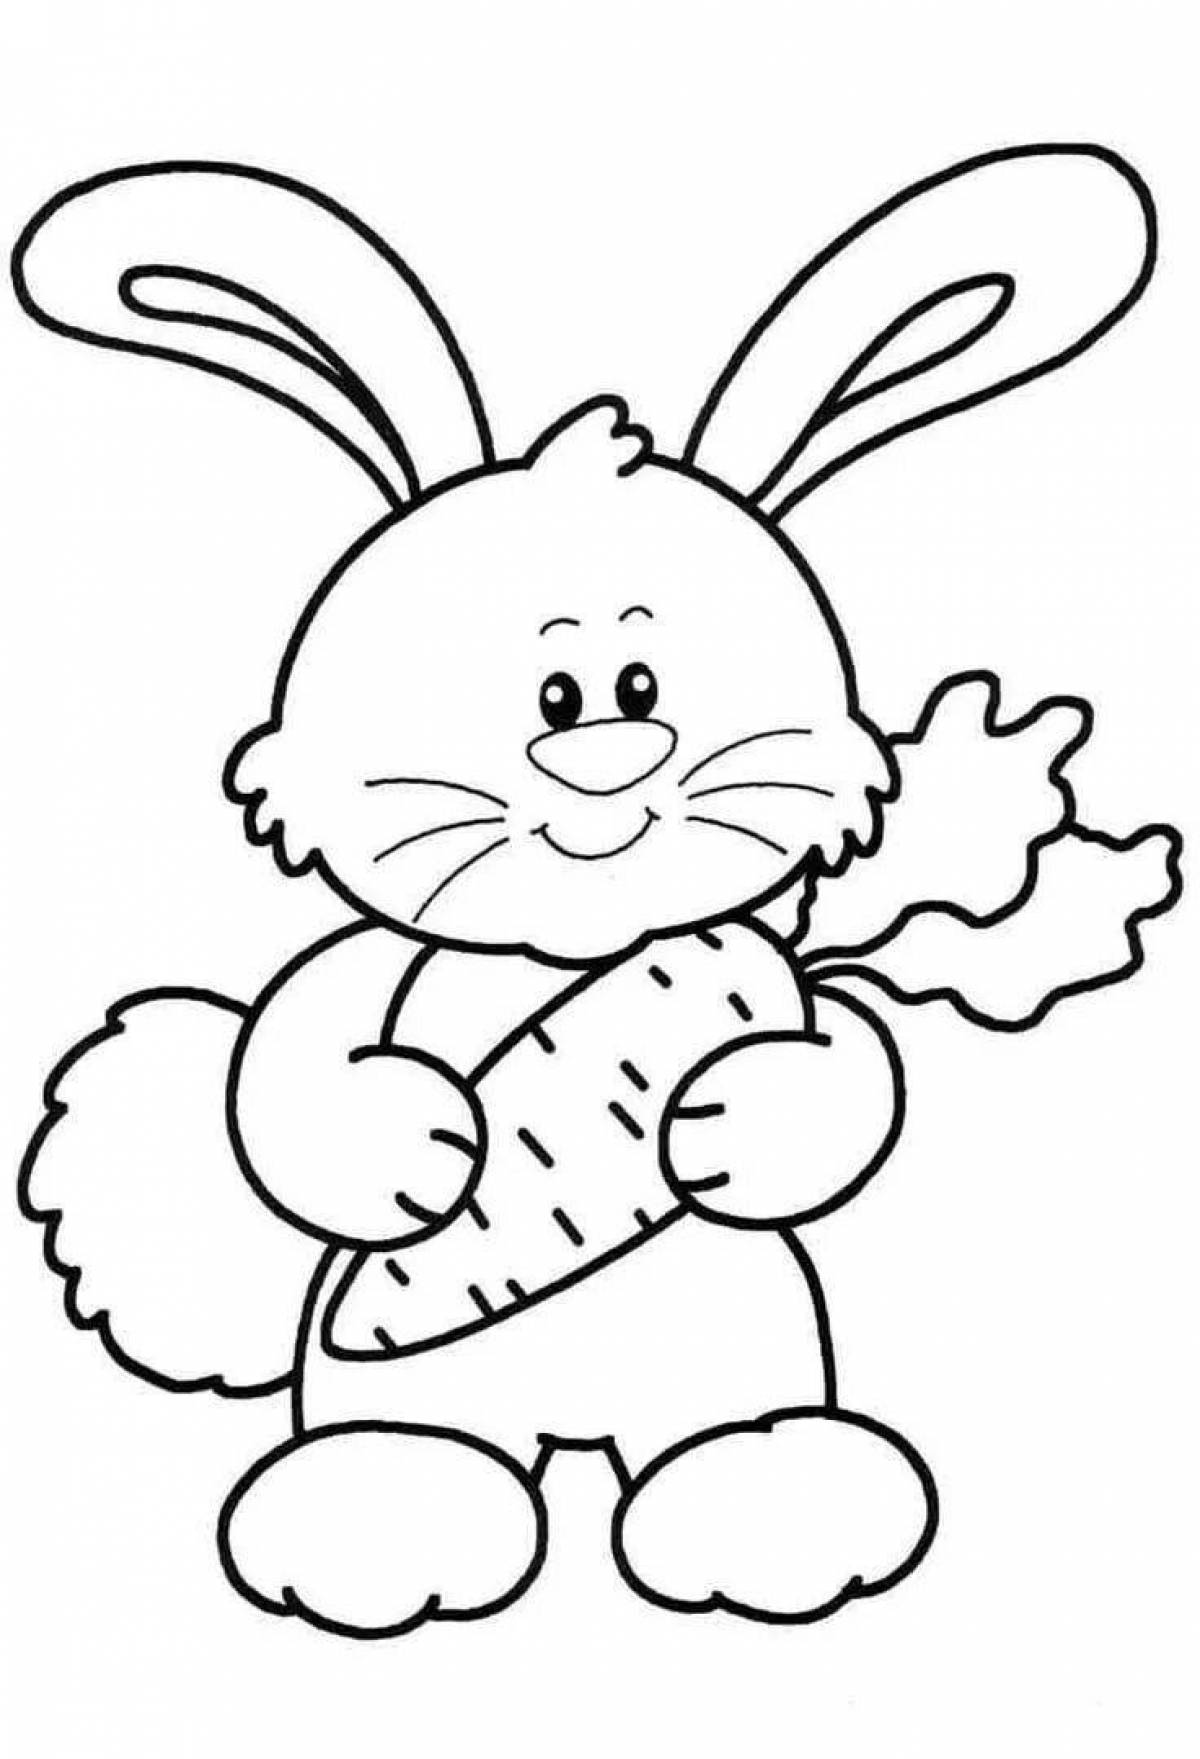 Adorable rabbit coloring book for 2 year olds